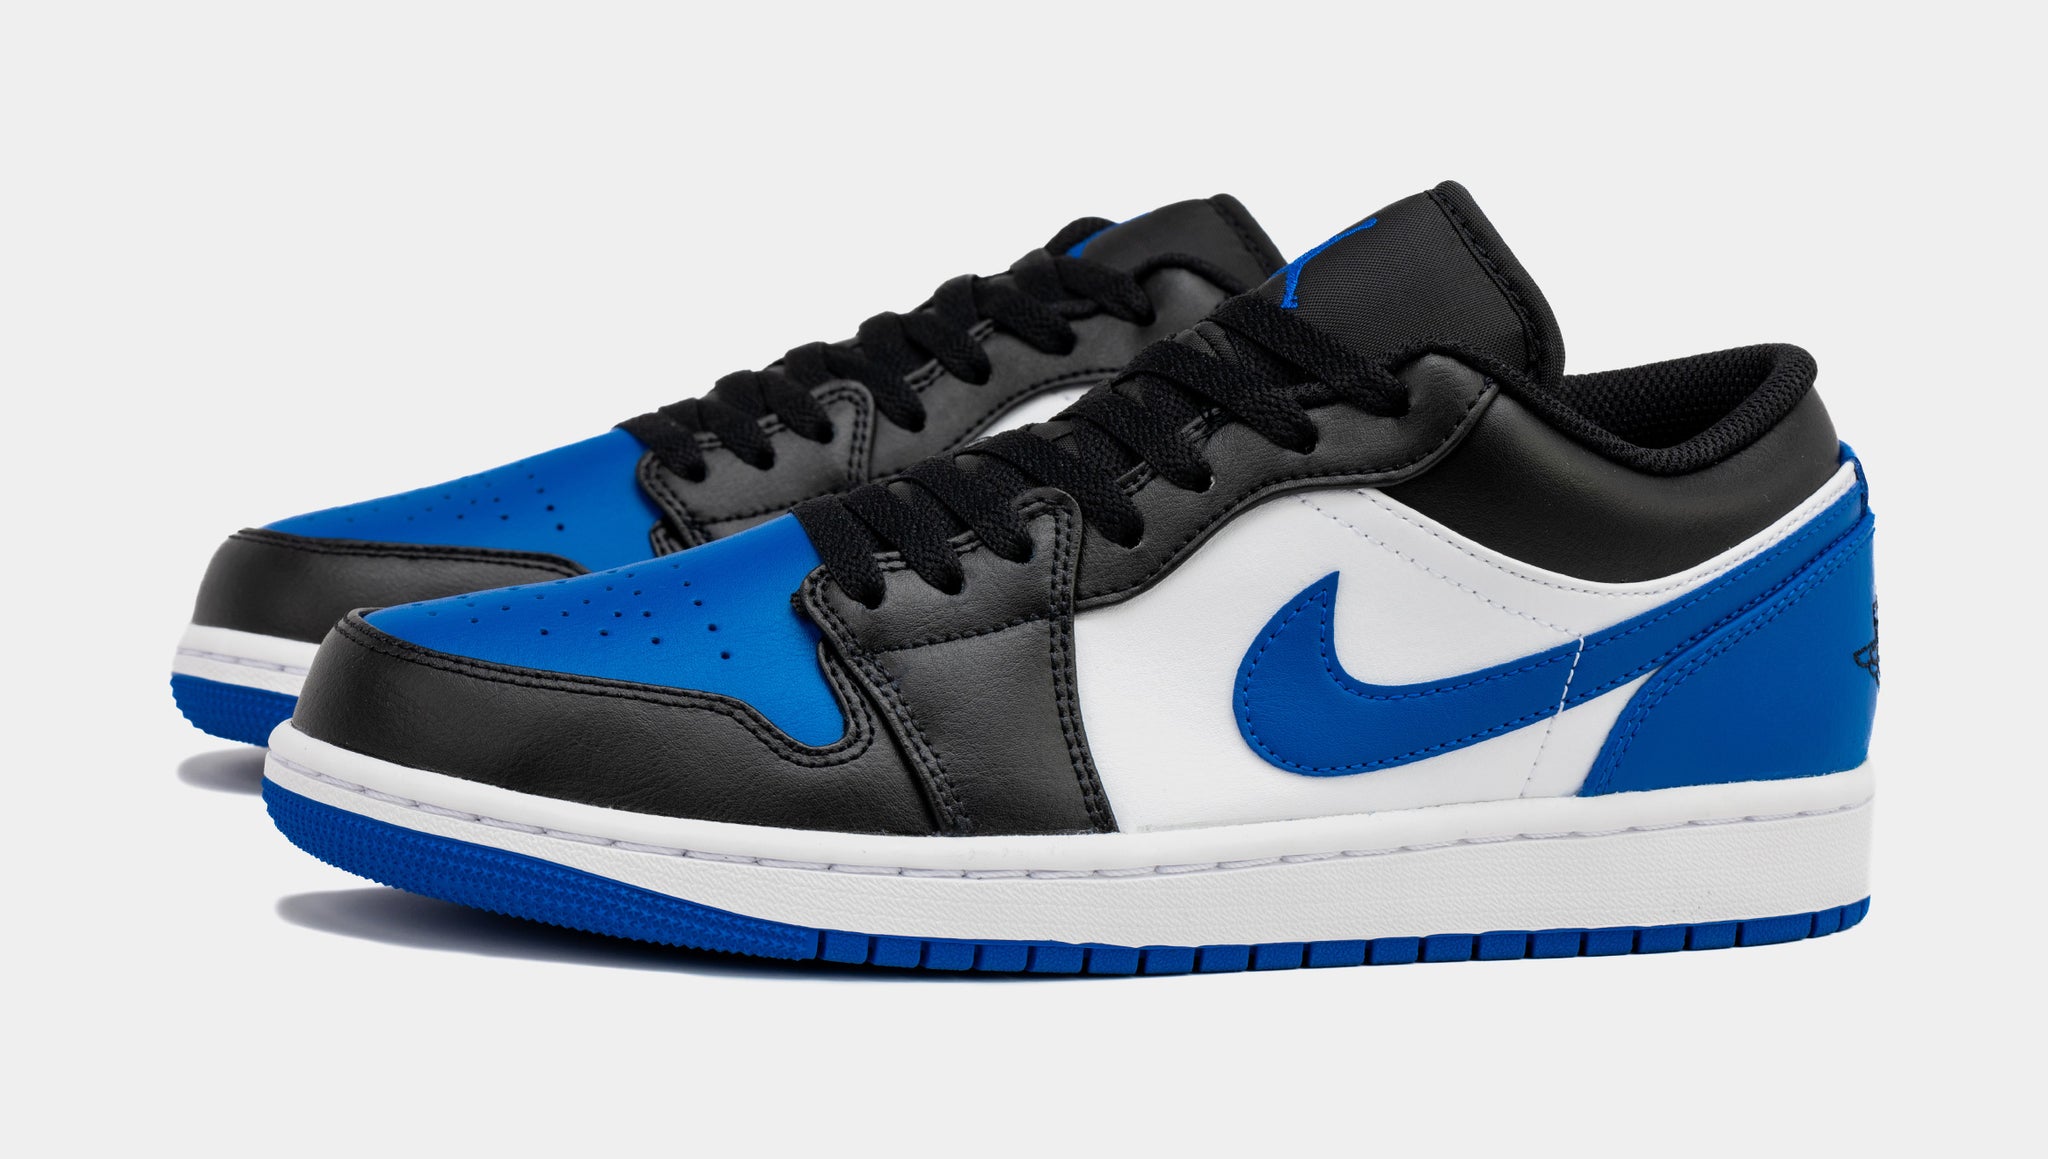 Thoughts on the Air Jordan 1 true blue? I don't understand why